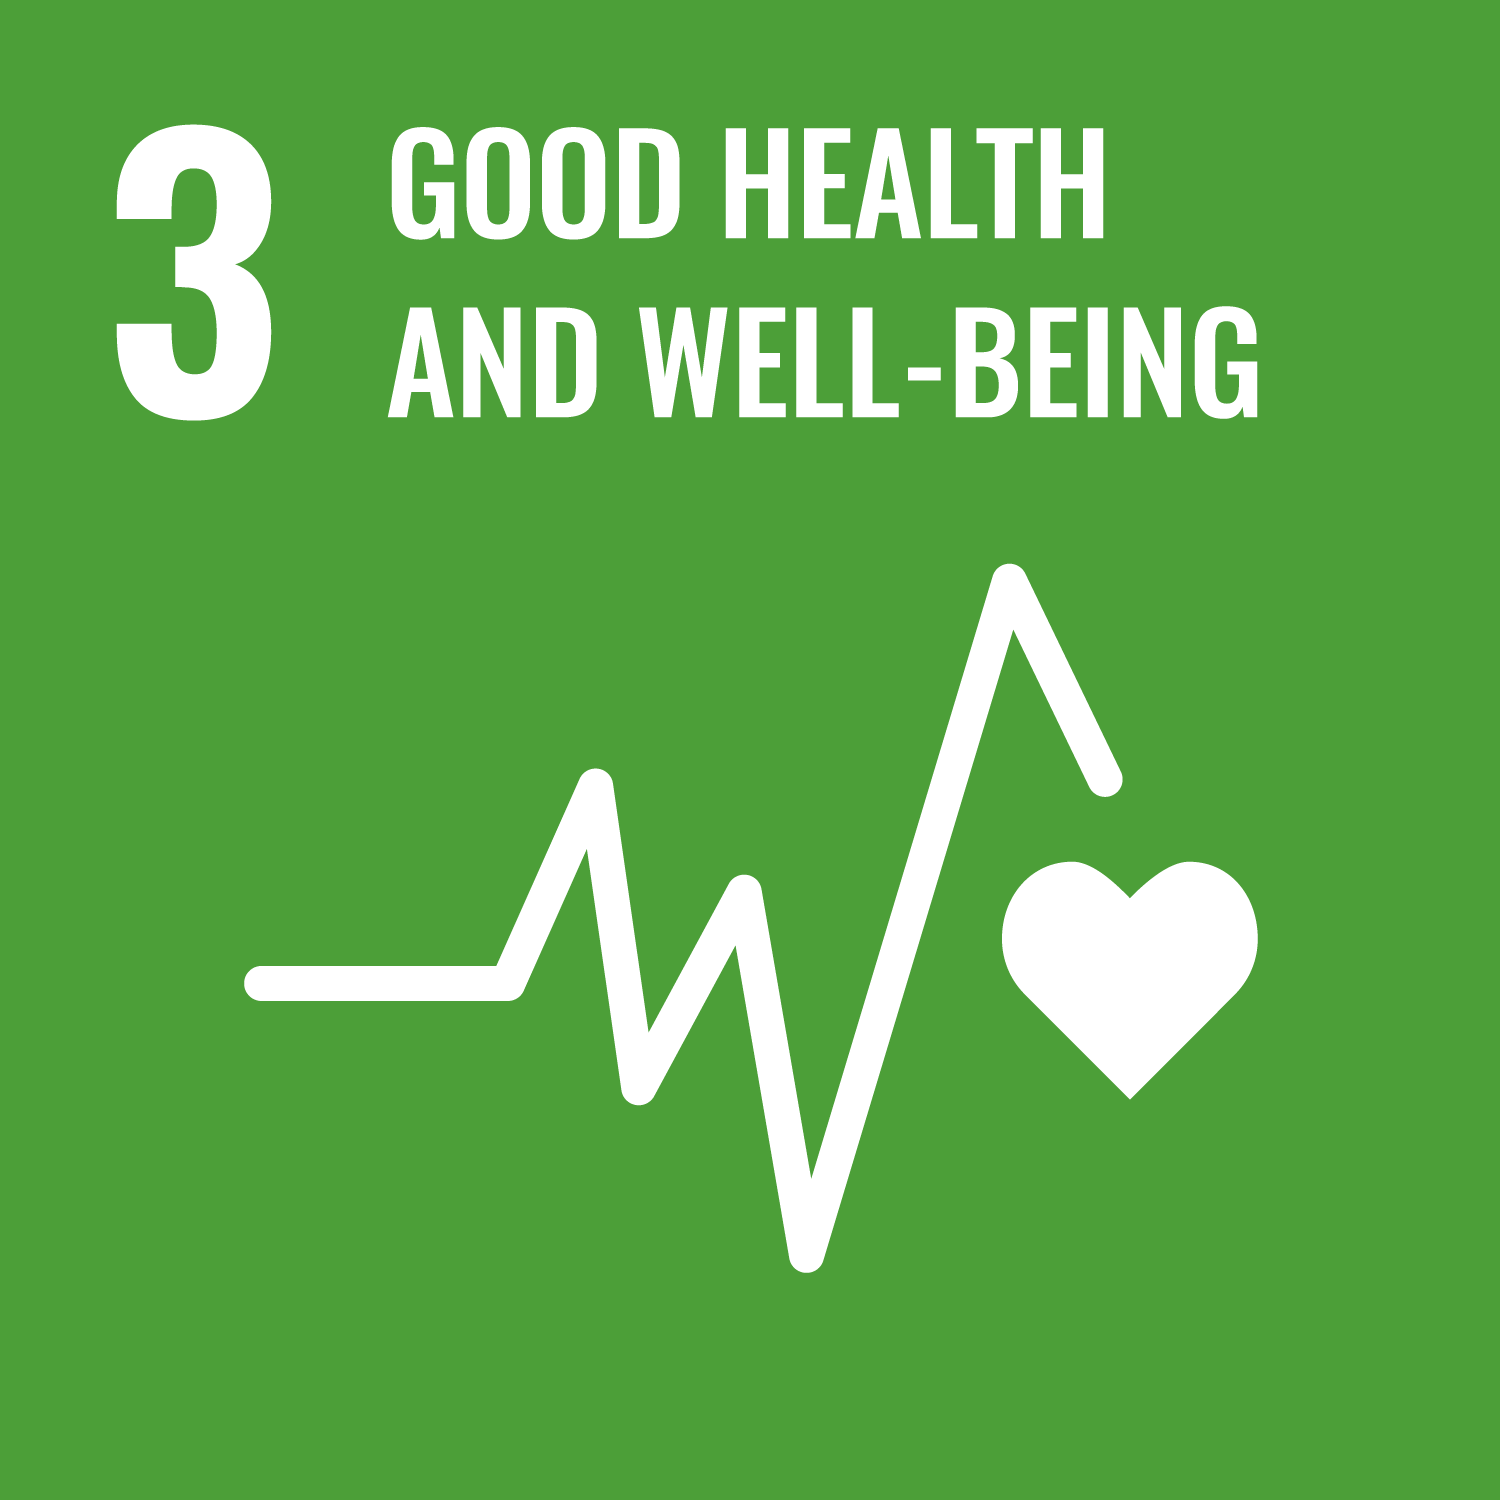 SDG Graphic for Good Health and Well-Being